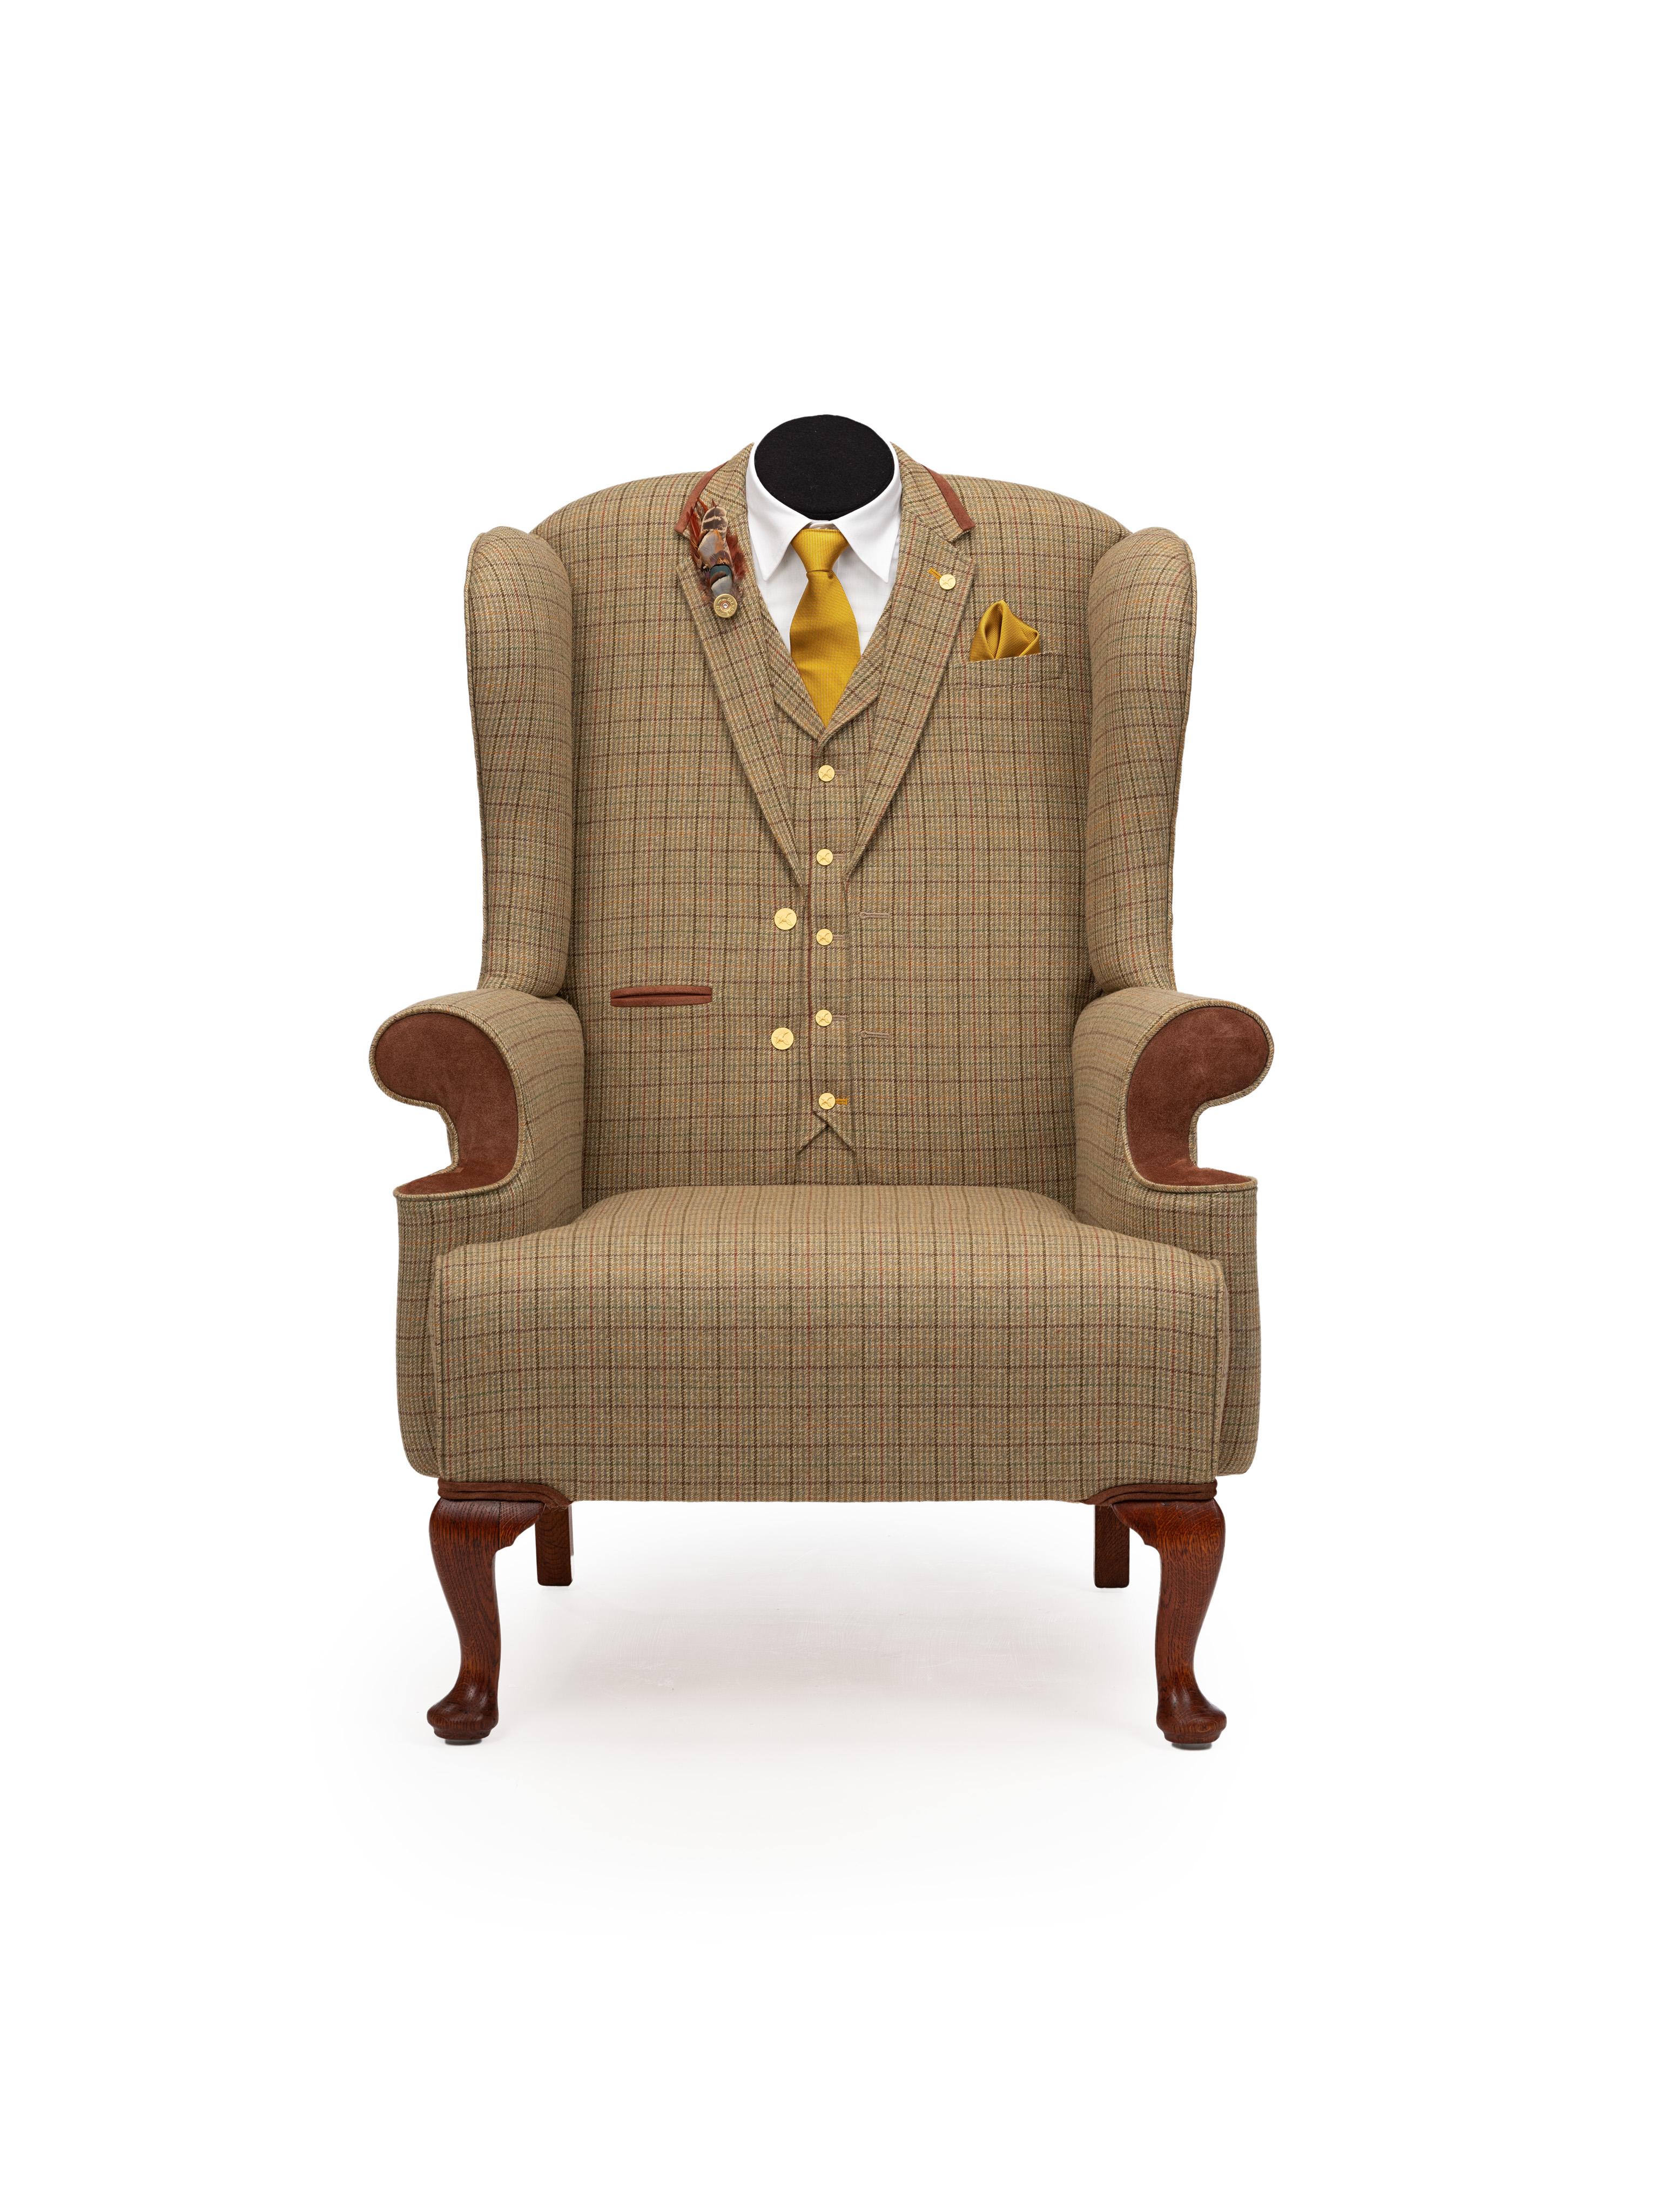 Midcentury Wingback Armchair 'The Dapper Tweed Hunting Wing Chair' 3